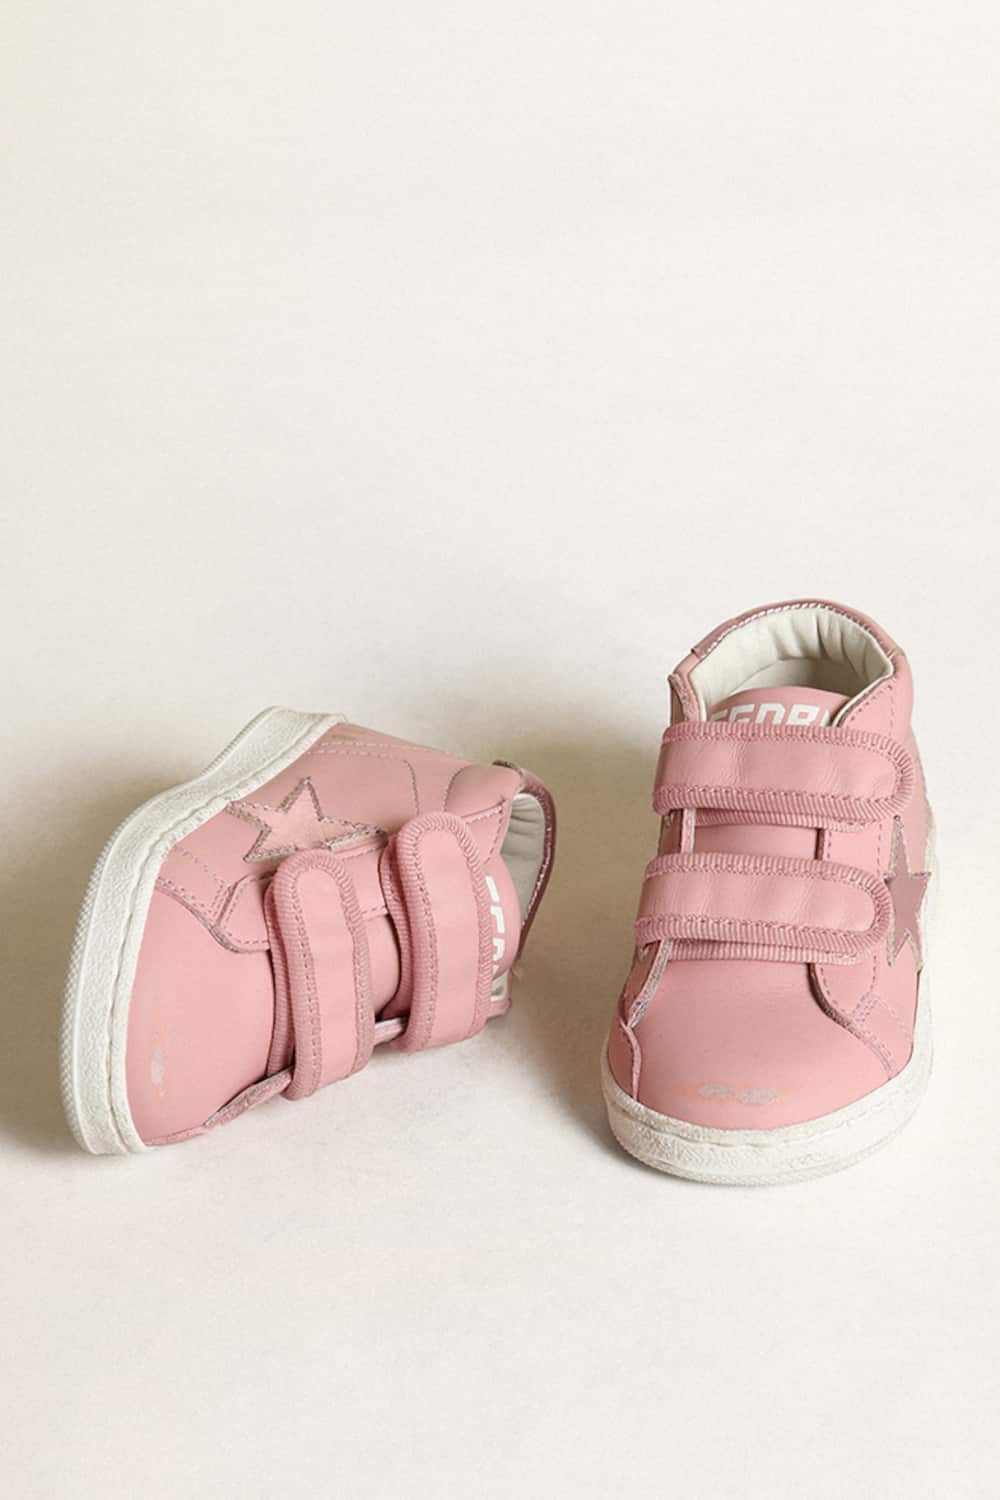 Golden Goose - June in pink nappa with pink metallic leather star and heel tab in 